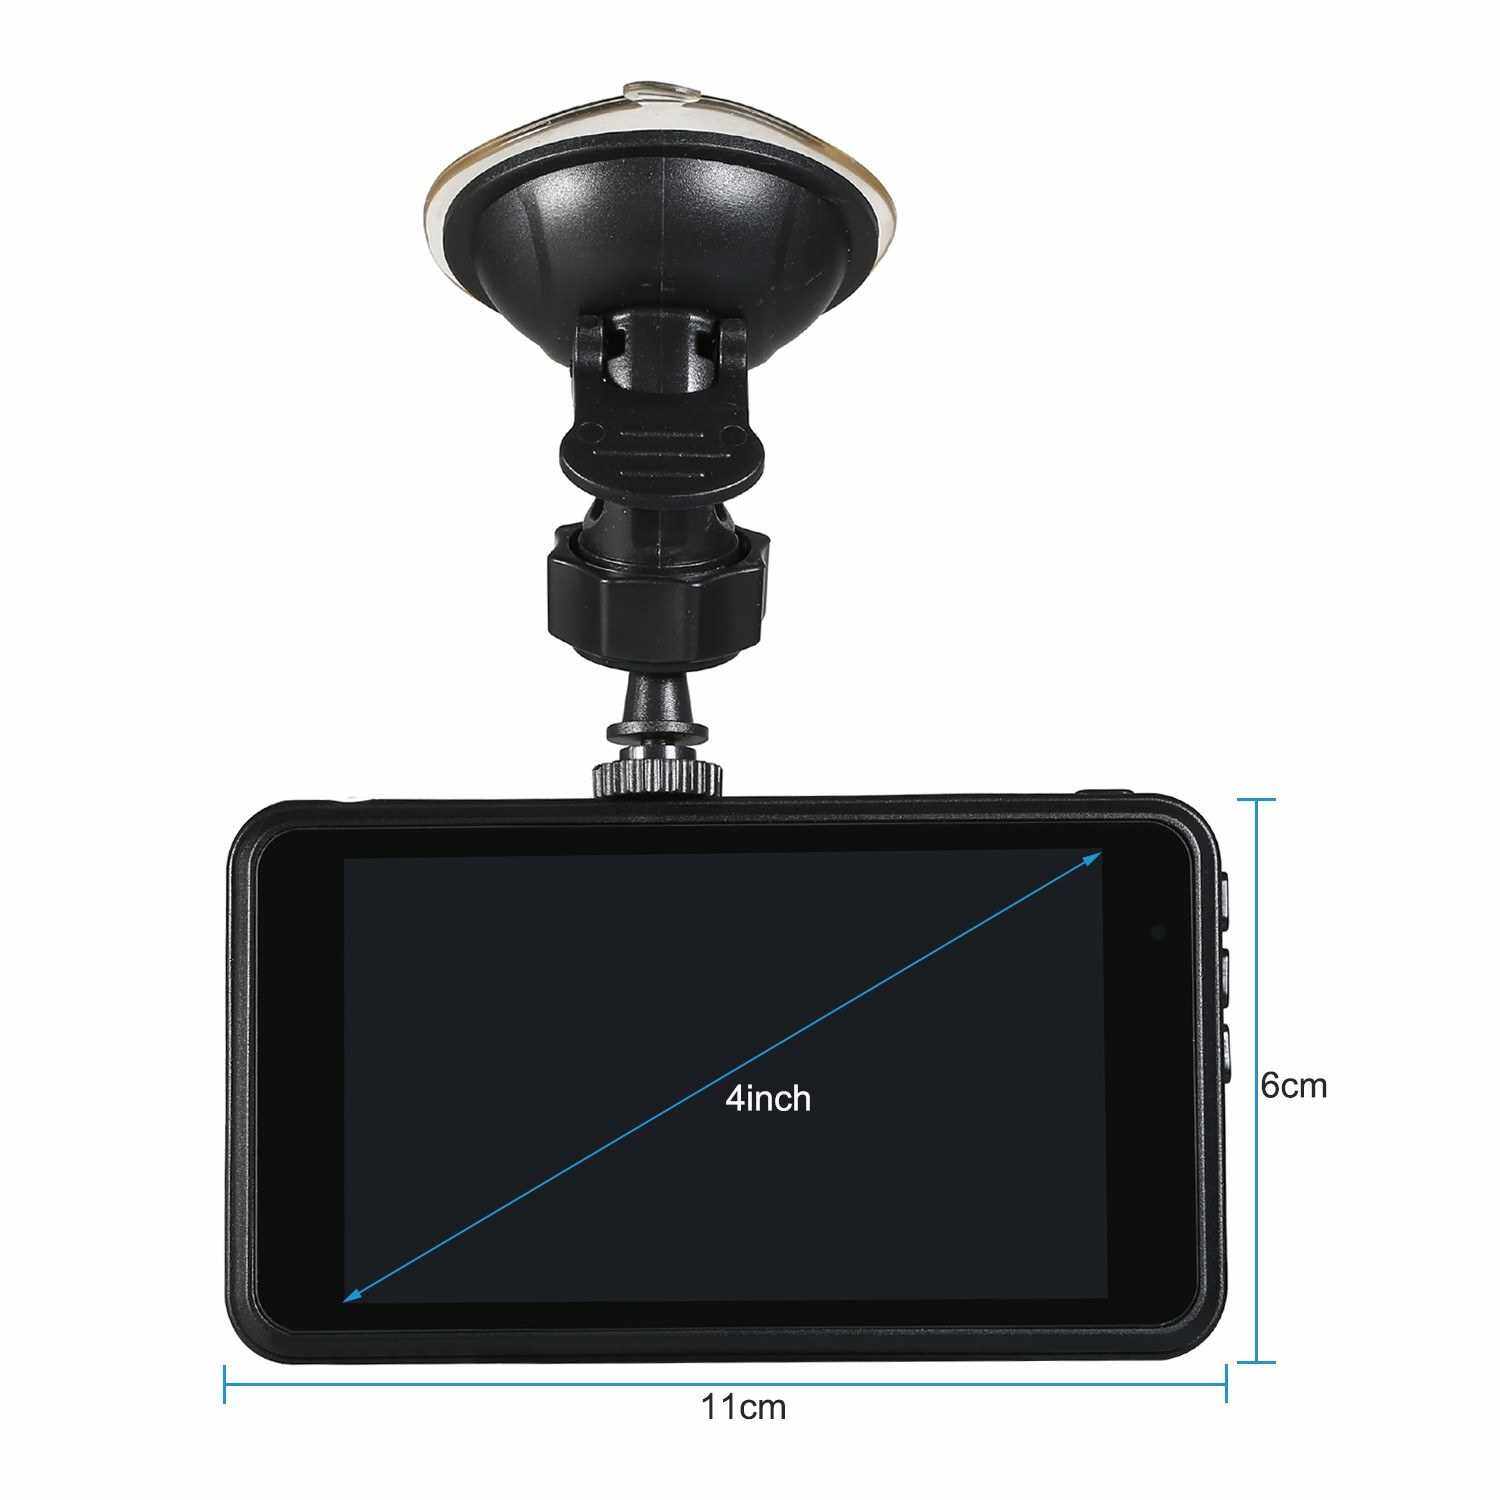 People's Choice 1080P FHD Car DVR 4inch Dash Cam Car Driving Recorder Dual Lens Vehicle Camcorder Loop-cycle Recording G-sensor Motion Detection Parking Monitor (Standard)